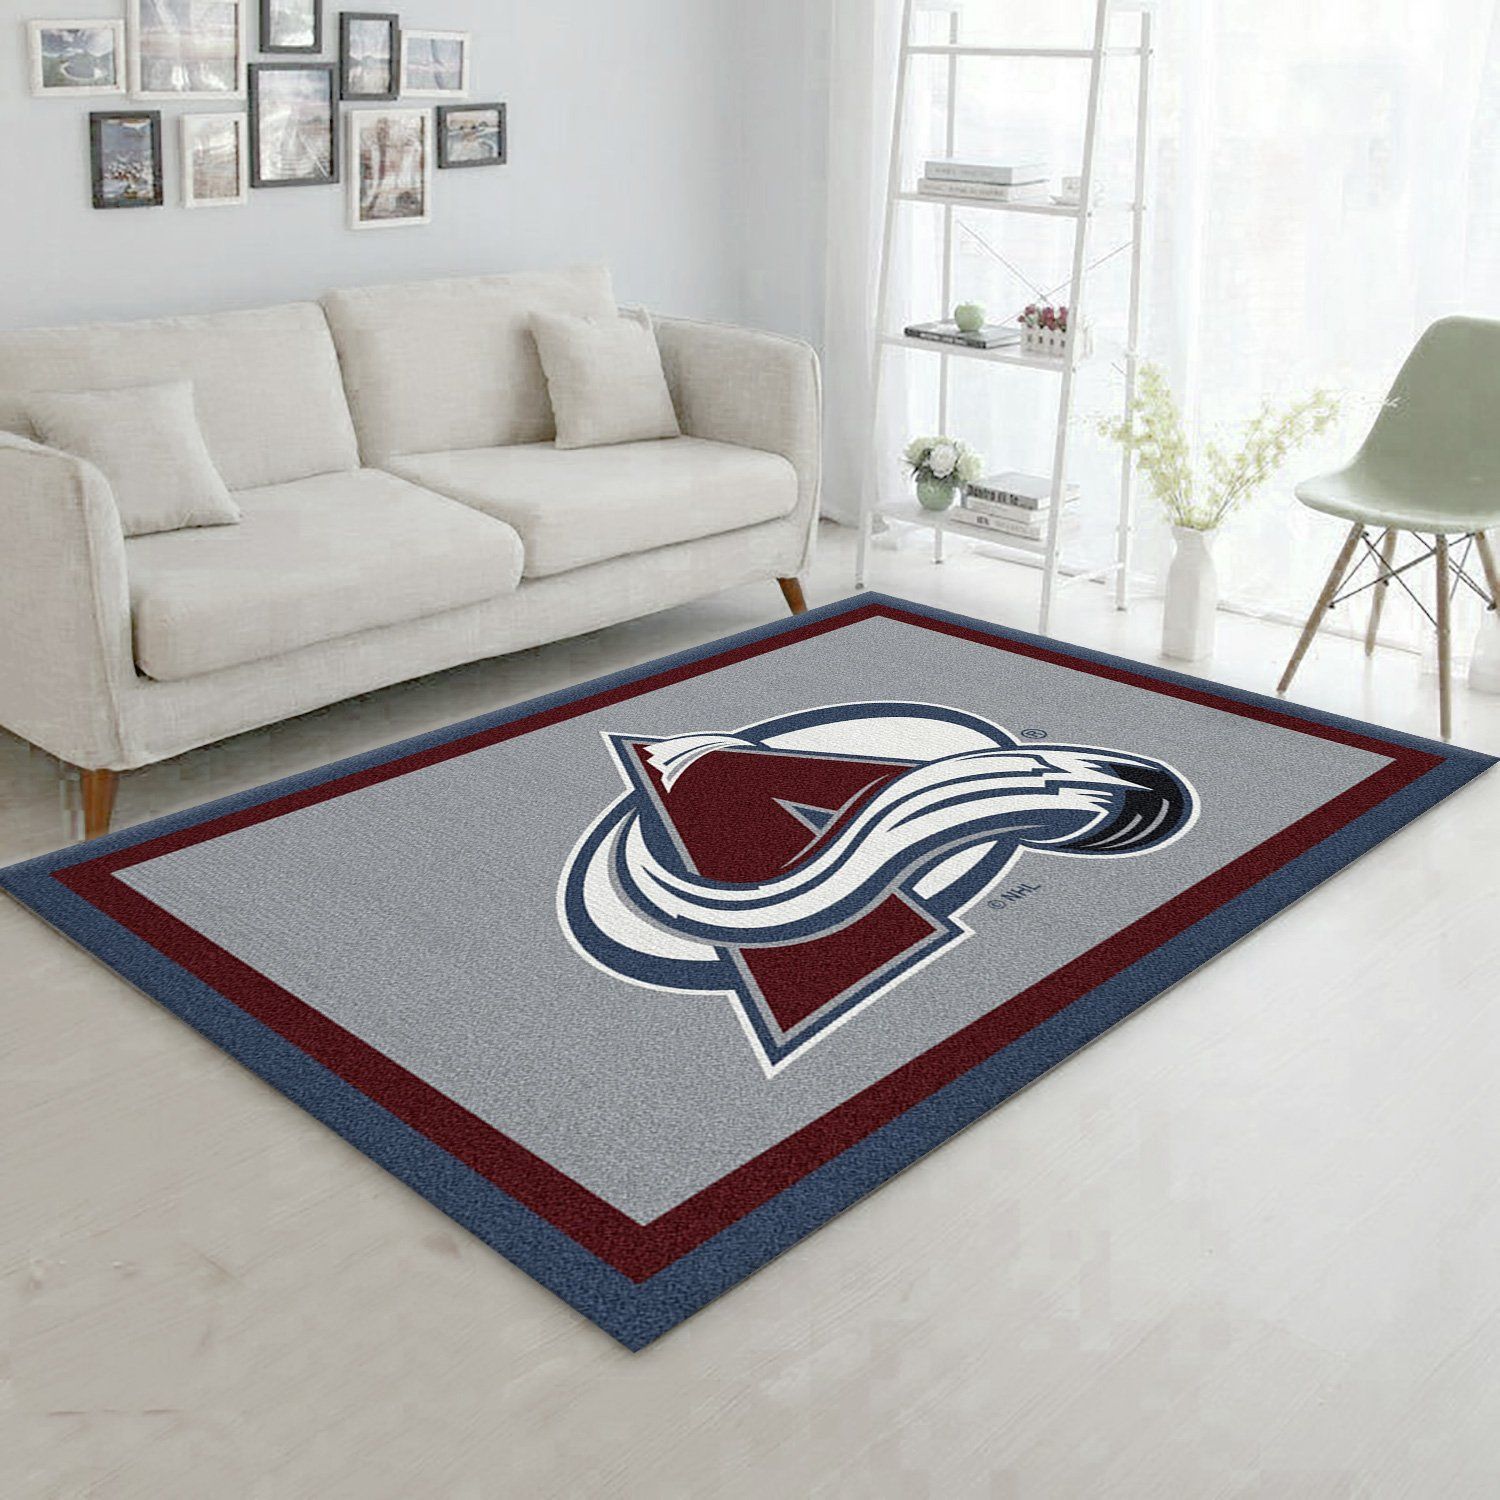 Nhl Spirit Colorado Avalanche Area Rug Carpet, Kitchen Rug, Christmas Gift US Decor - Indoor Outdoor Rugs